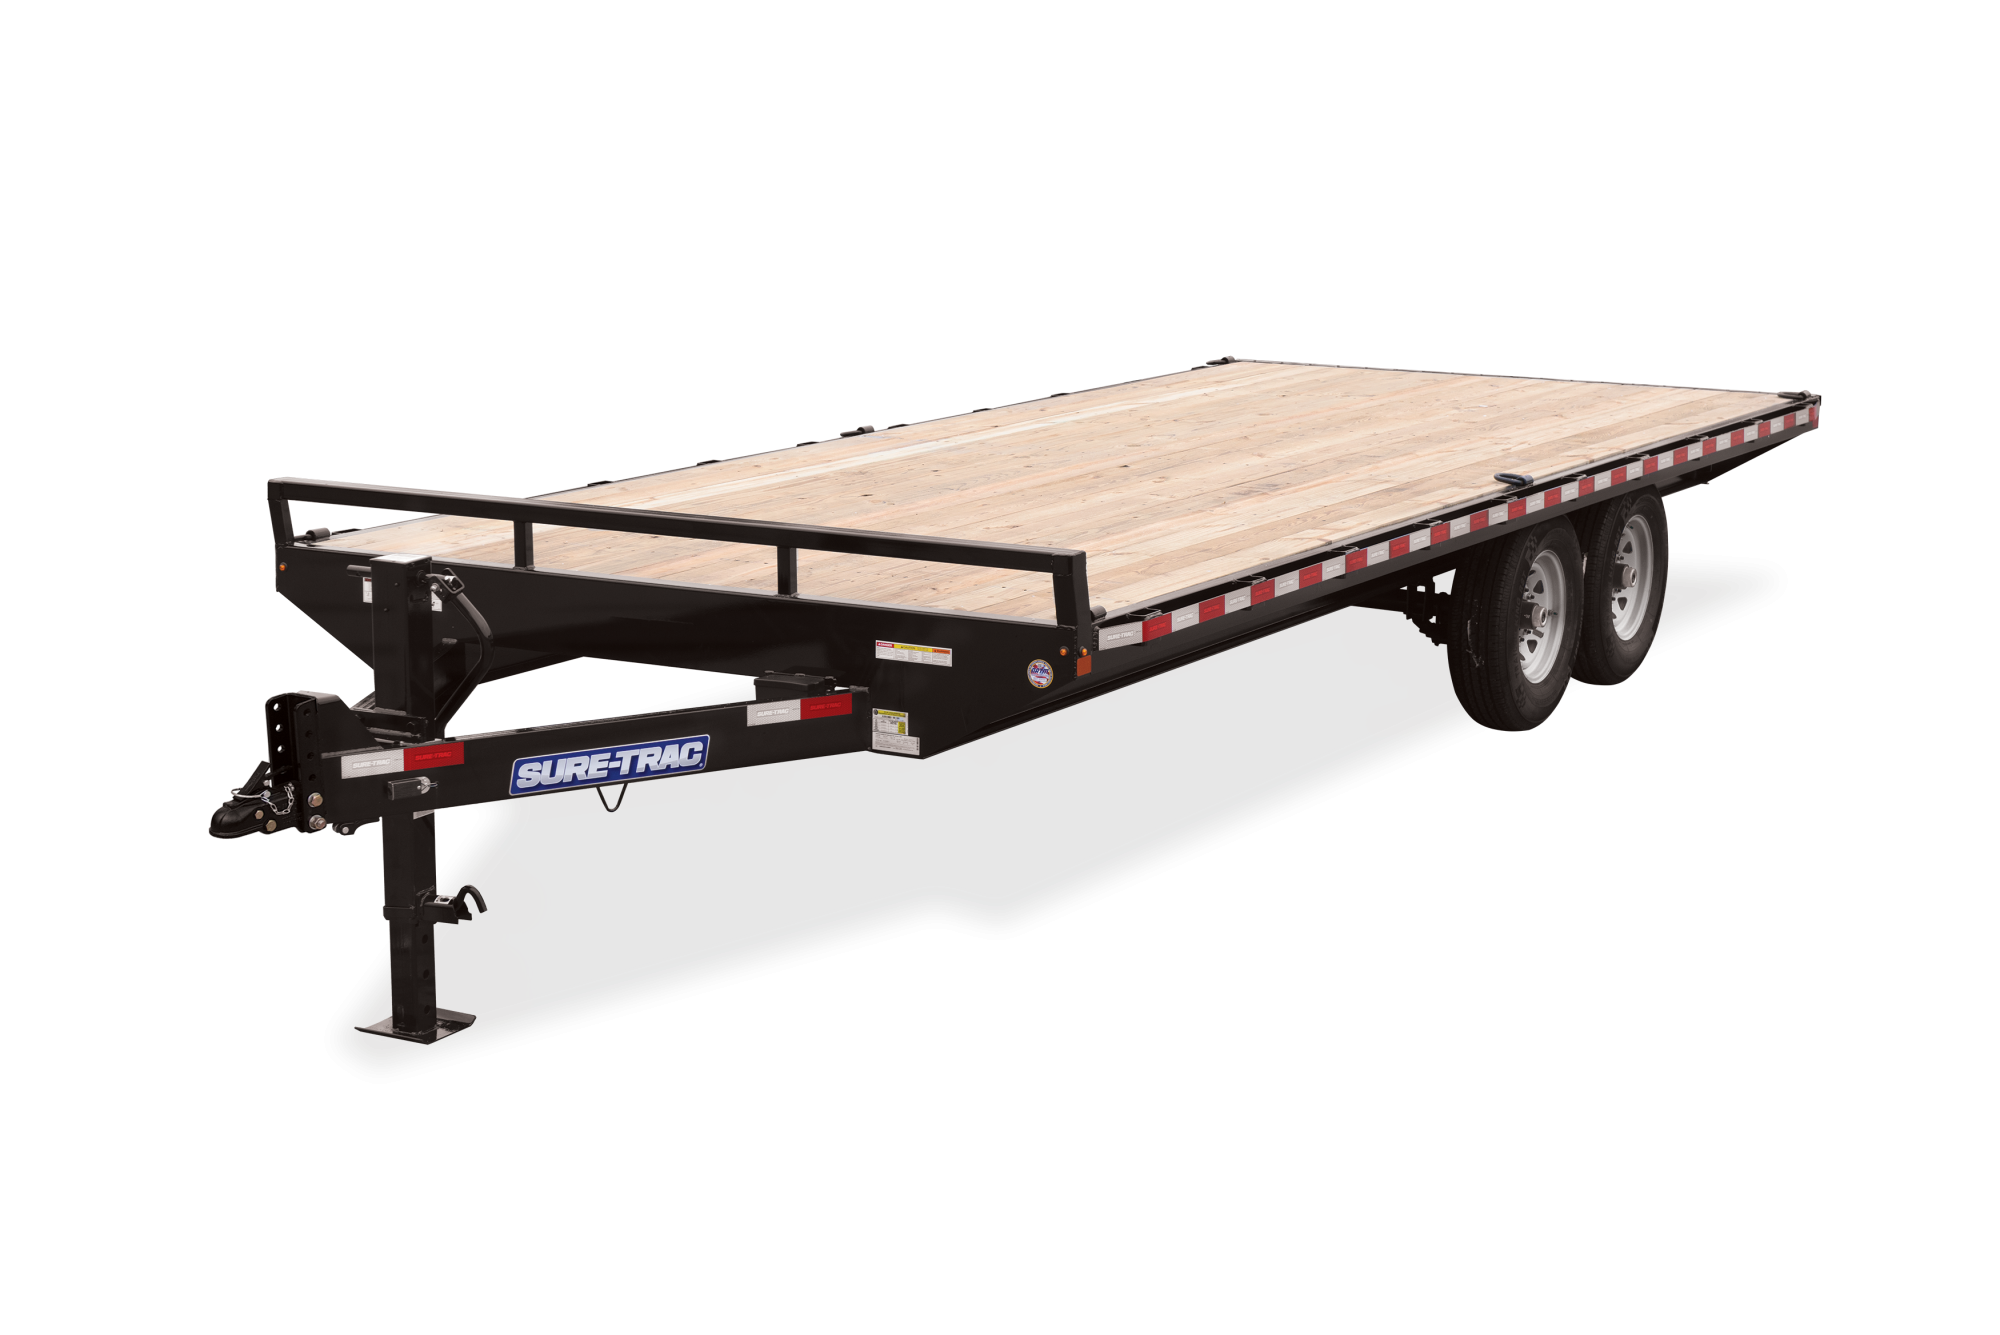 Wide View of the Low Profile Flatbed Deckover